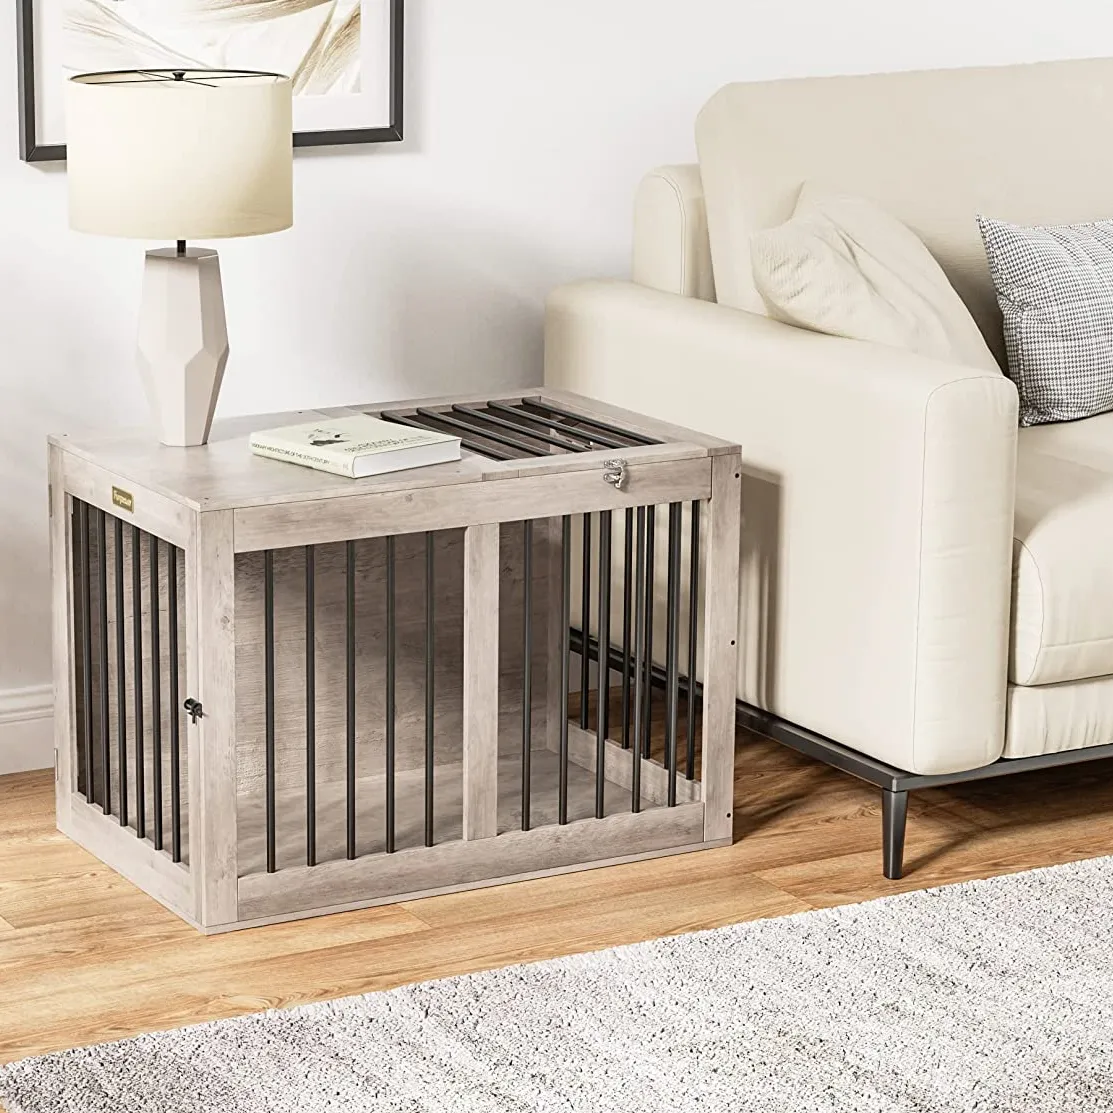 Modern Decorative End Table Furniture Style Dog Crate Indoor Wooden Dog Kennels with Double Doors